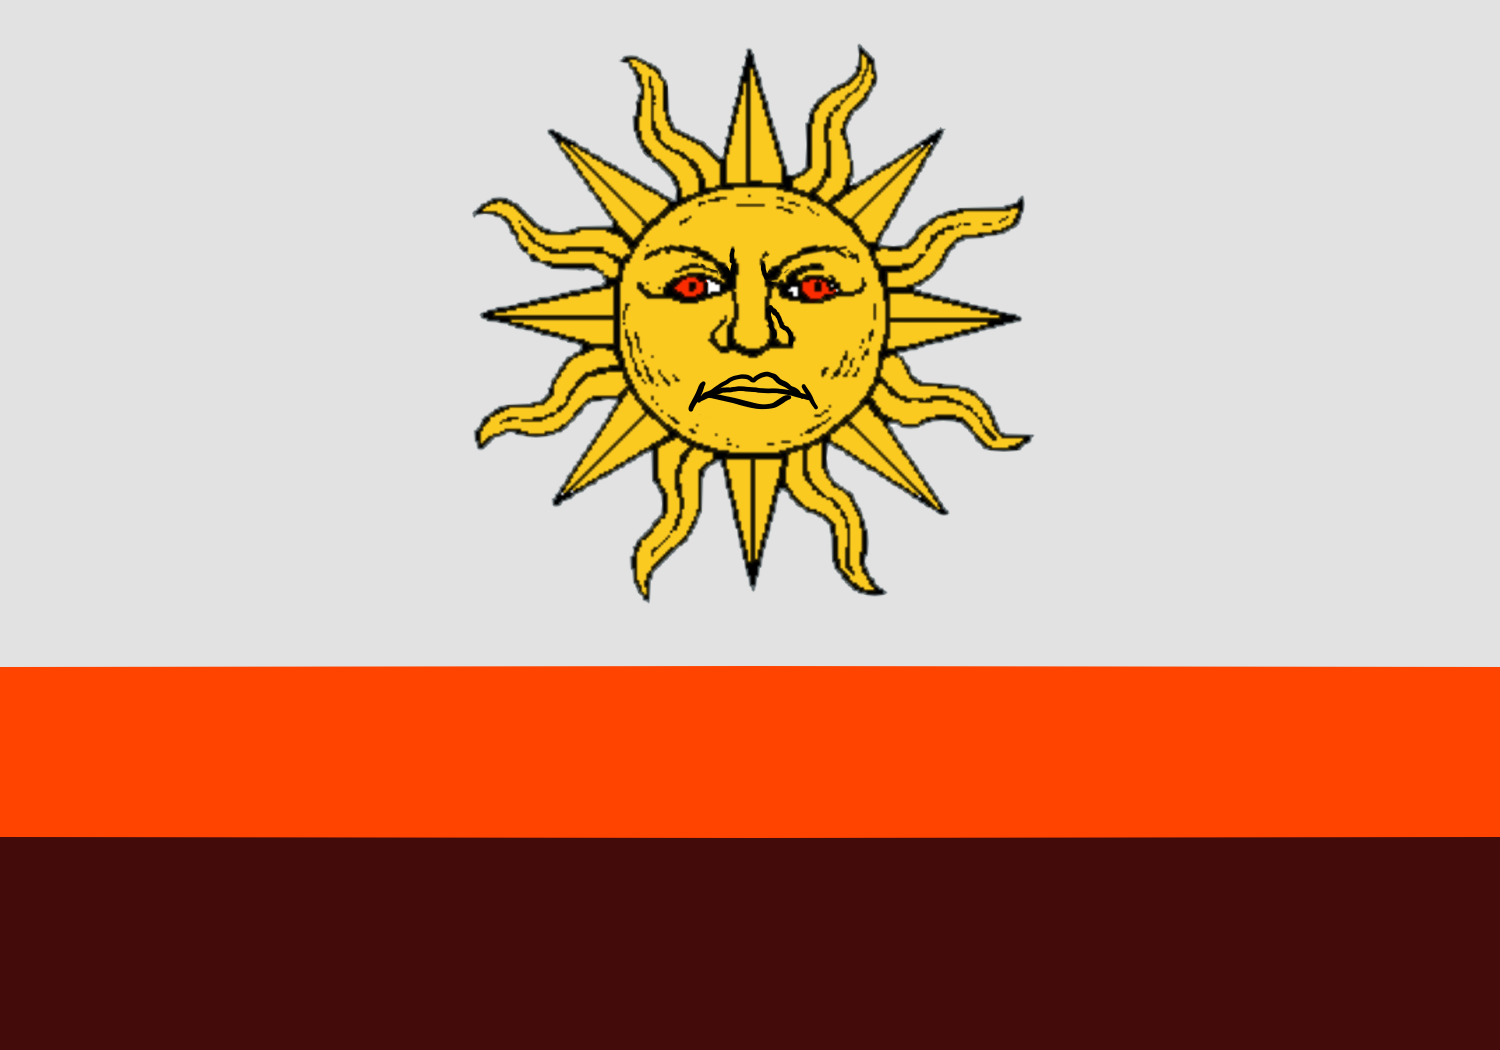 A flag with three horizontal stripes: off-white, orange and burgundy. In the top stripe, which is wider, there is a yellow angry sun with orange eyes.